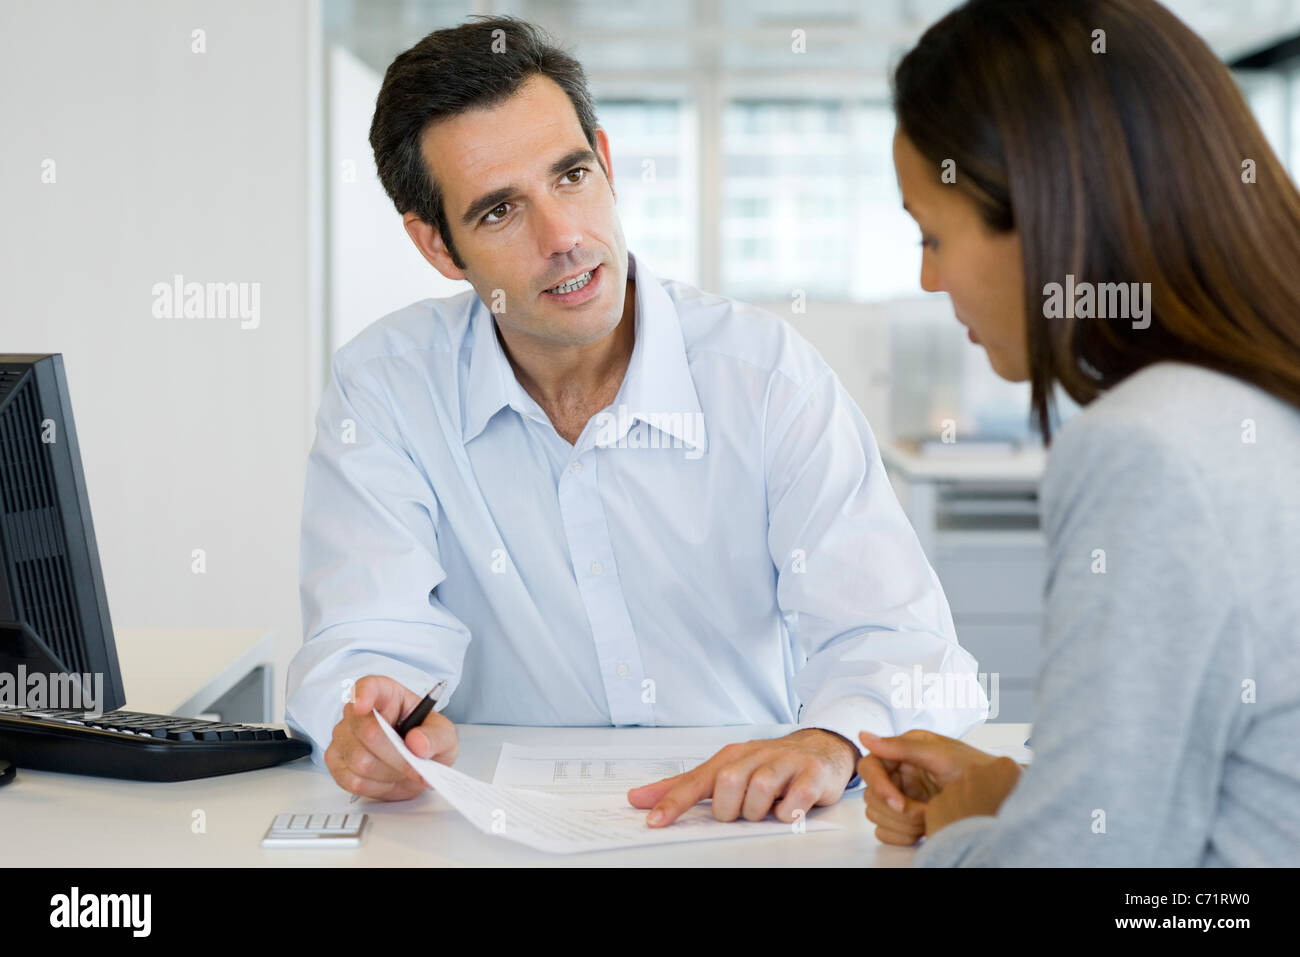 Financial advisor meeting with client Stock Photo